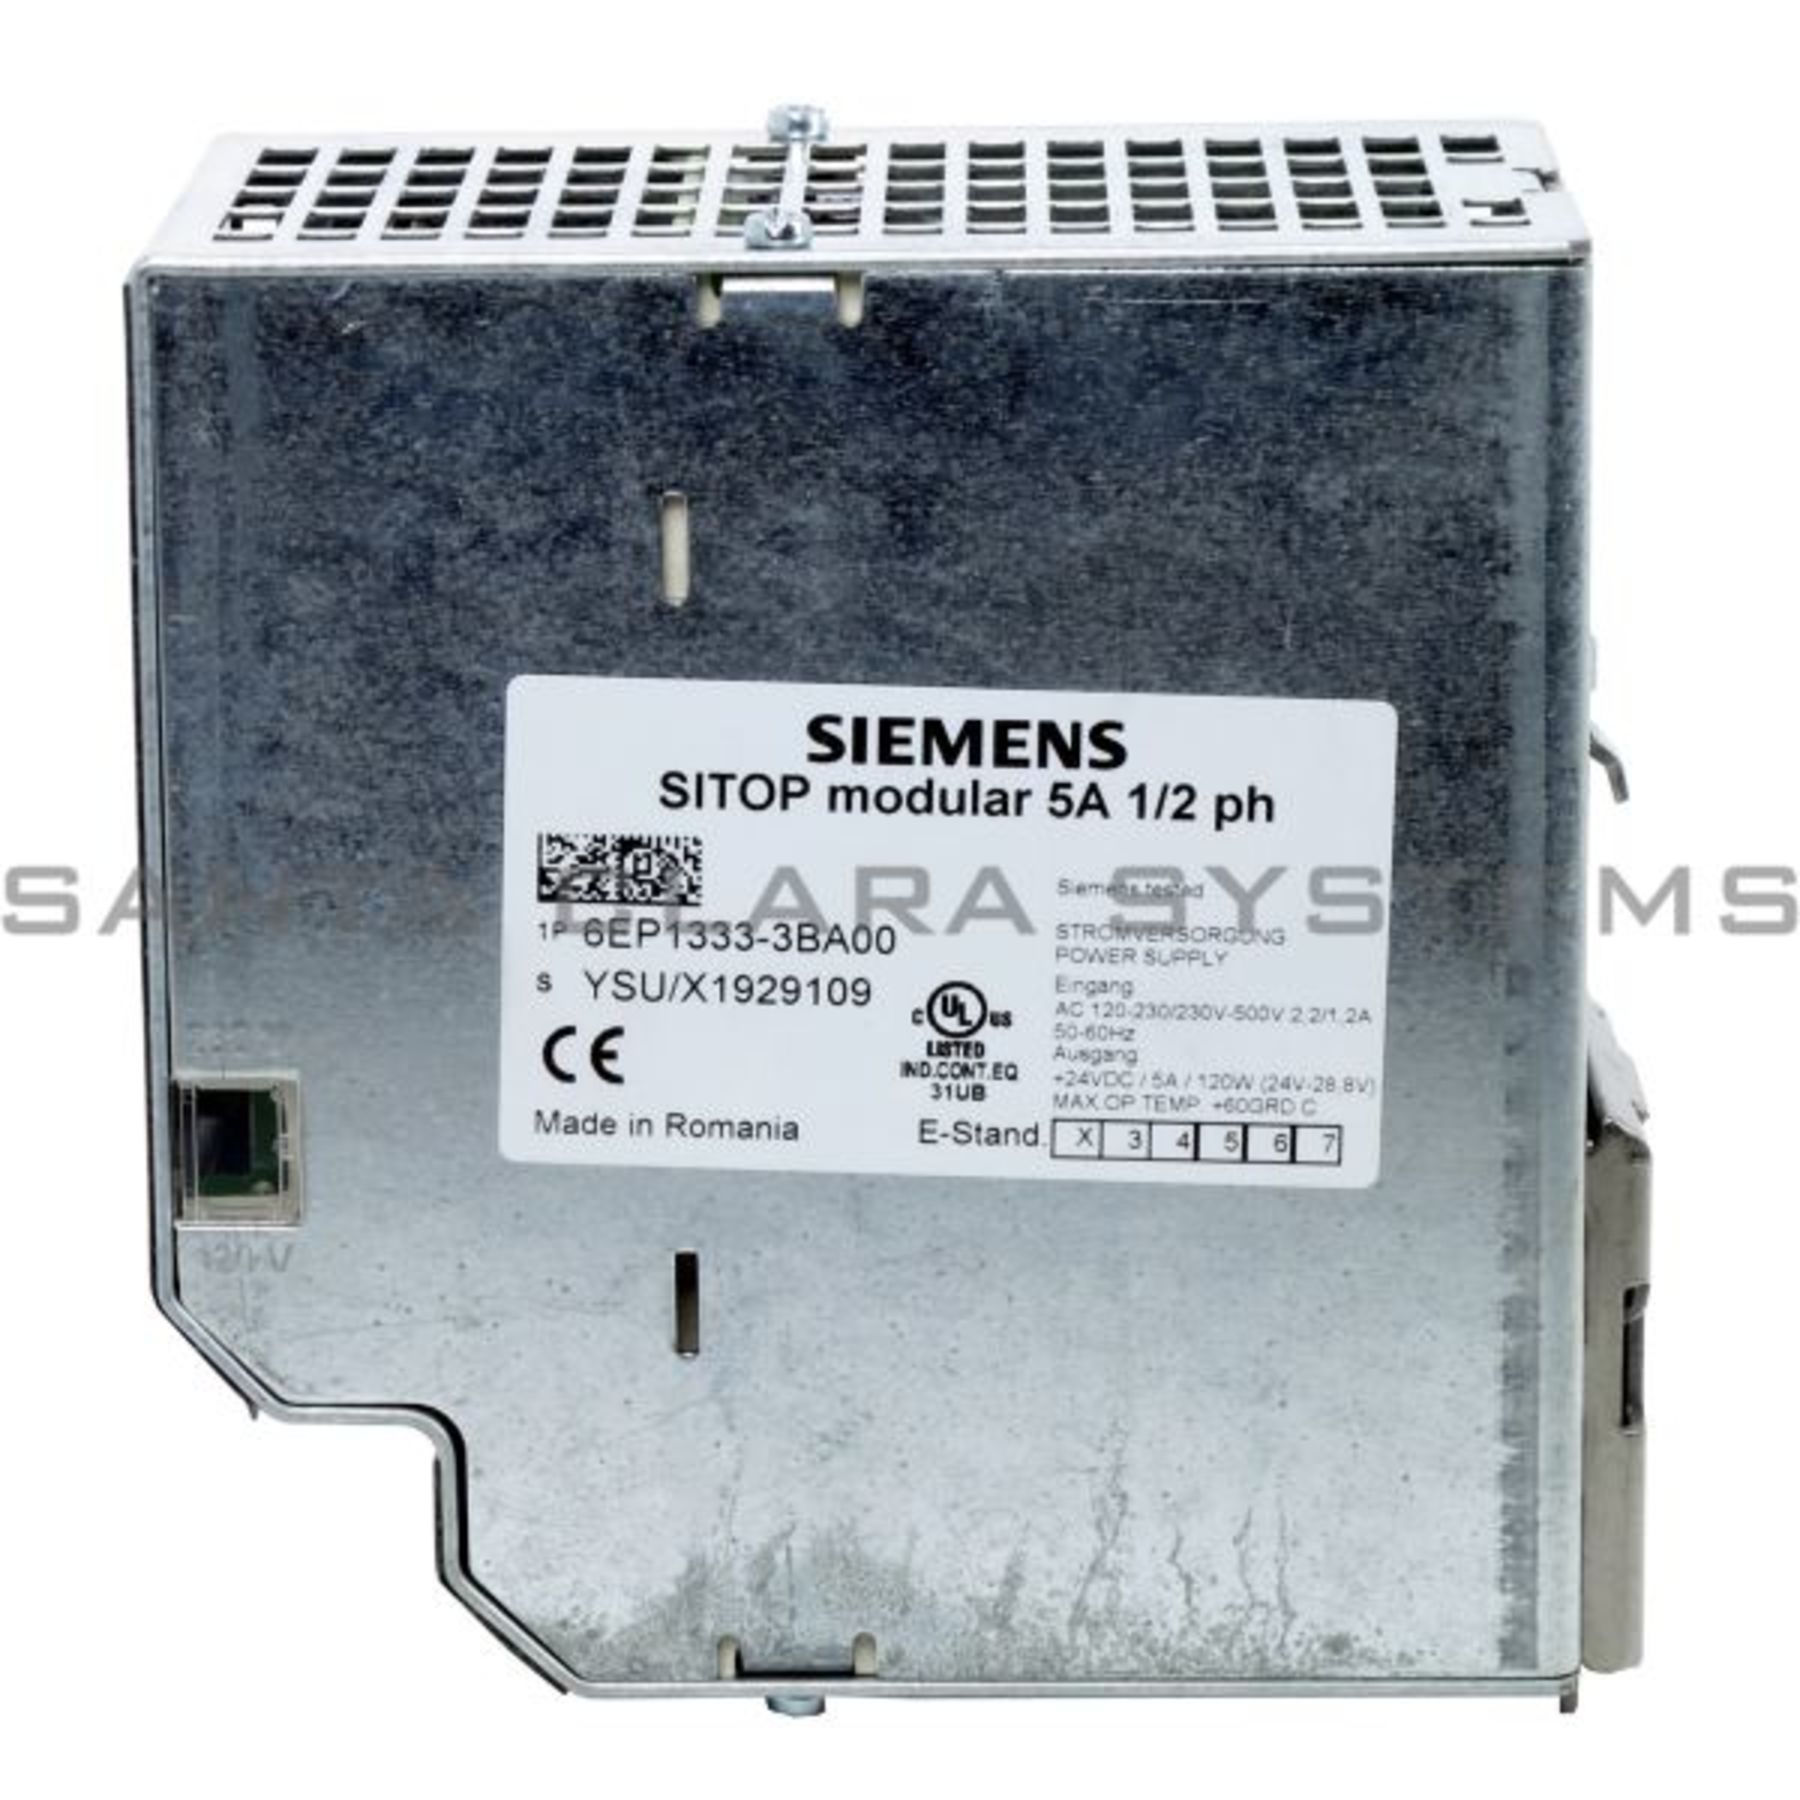 used 02 Power Supply Siemens Sitop 6EP1333-3BA00 6EP1 333-3BA00 E-Stand 